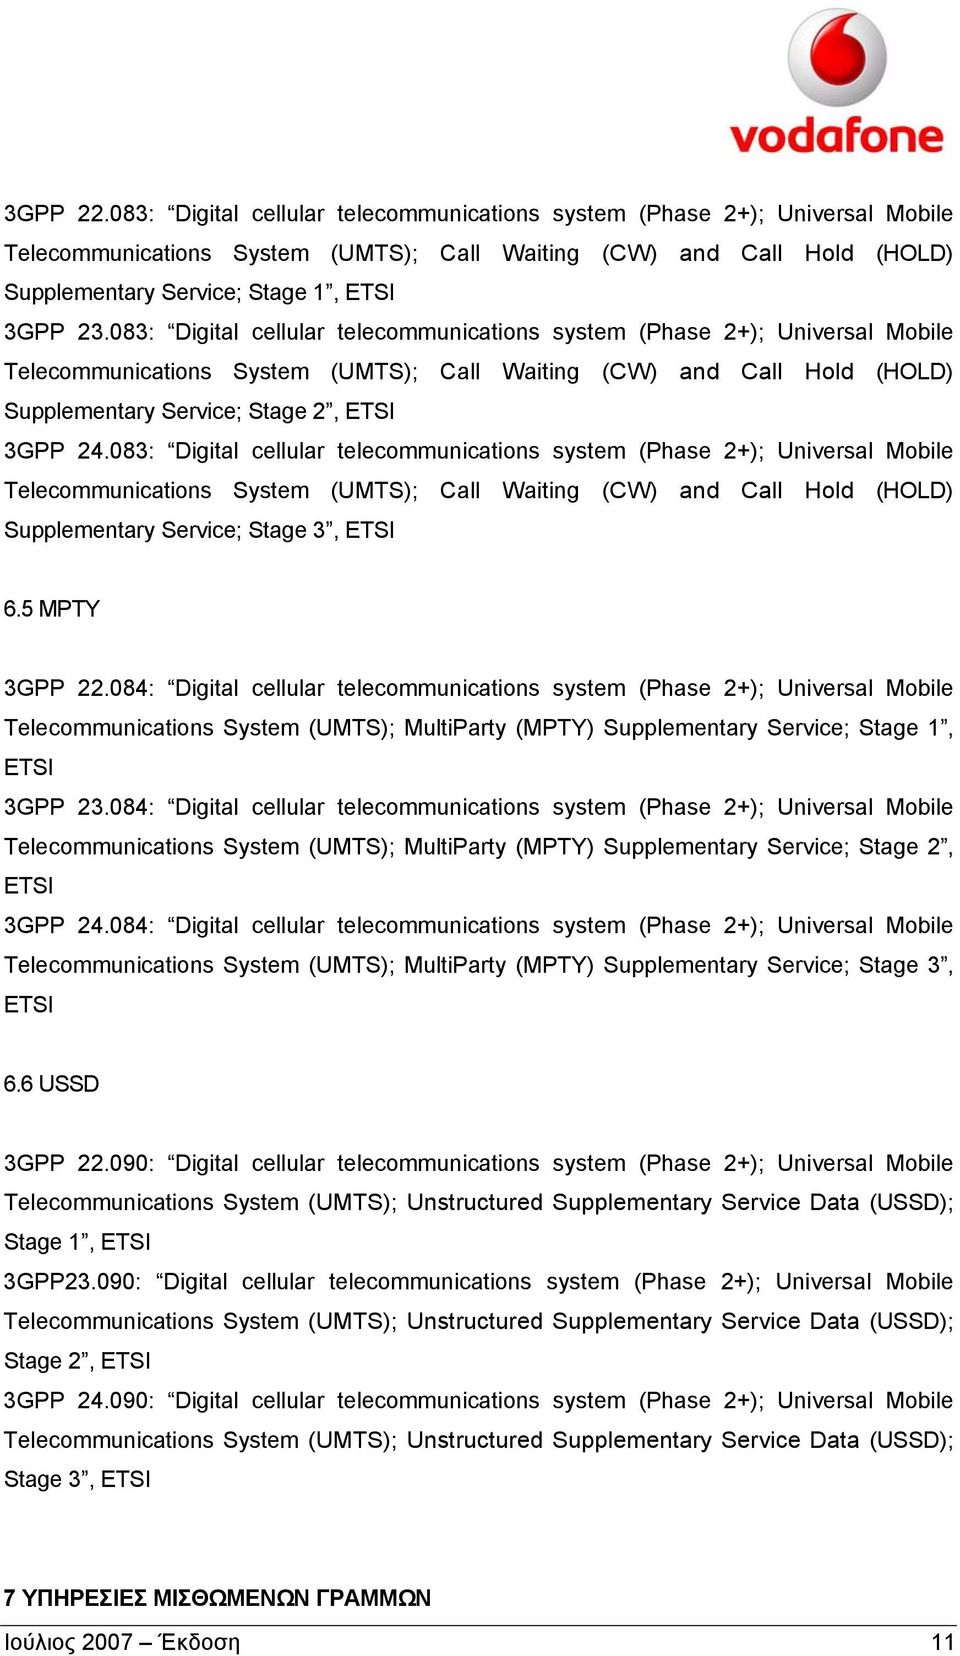 083: Digital cellular telecommunications system (Phase 2+); Universal Mobile Telecommunications System (UMTS); Call Waiting (CW) and Call Hold (HOLD) Supplementary Service; Stage 3, 6.5 MPTY 3GPP 22.